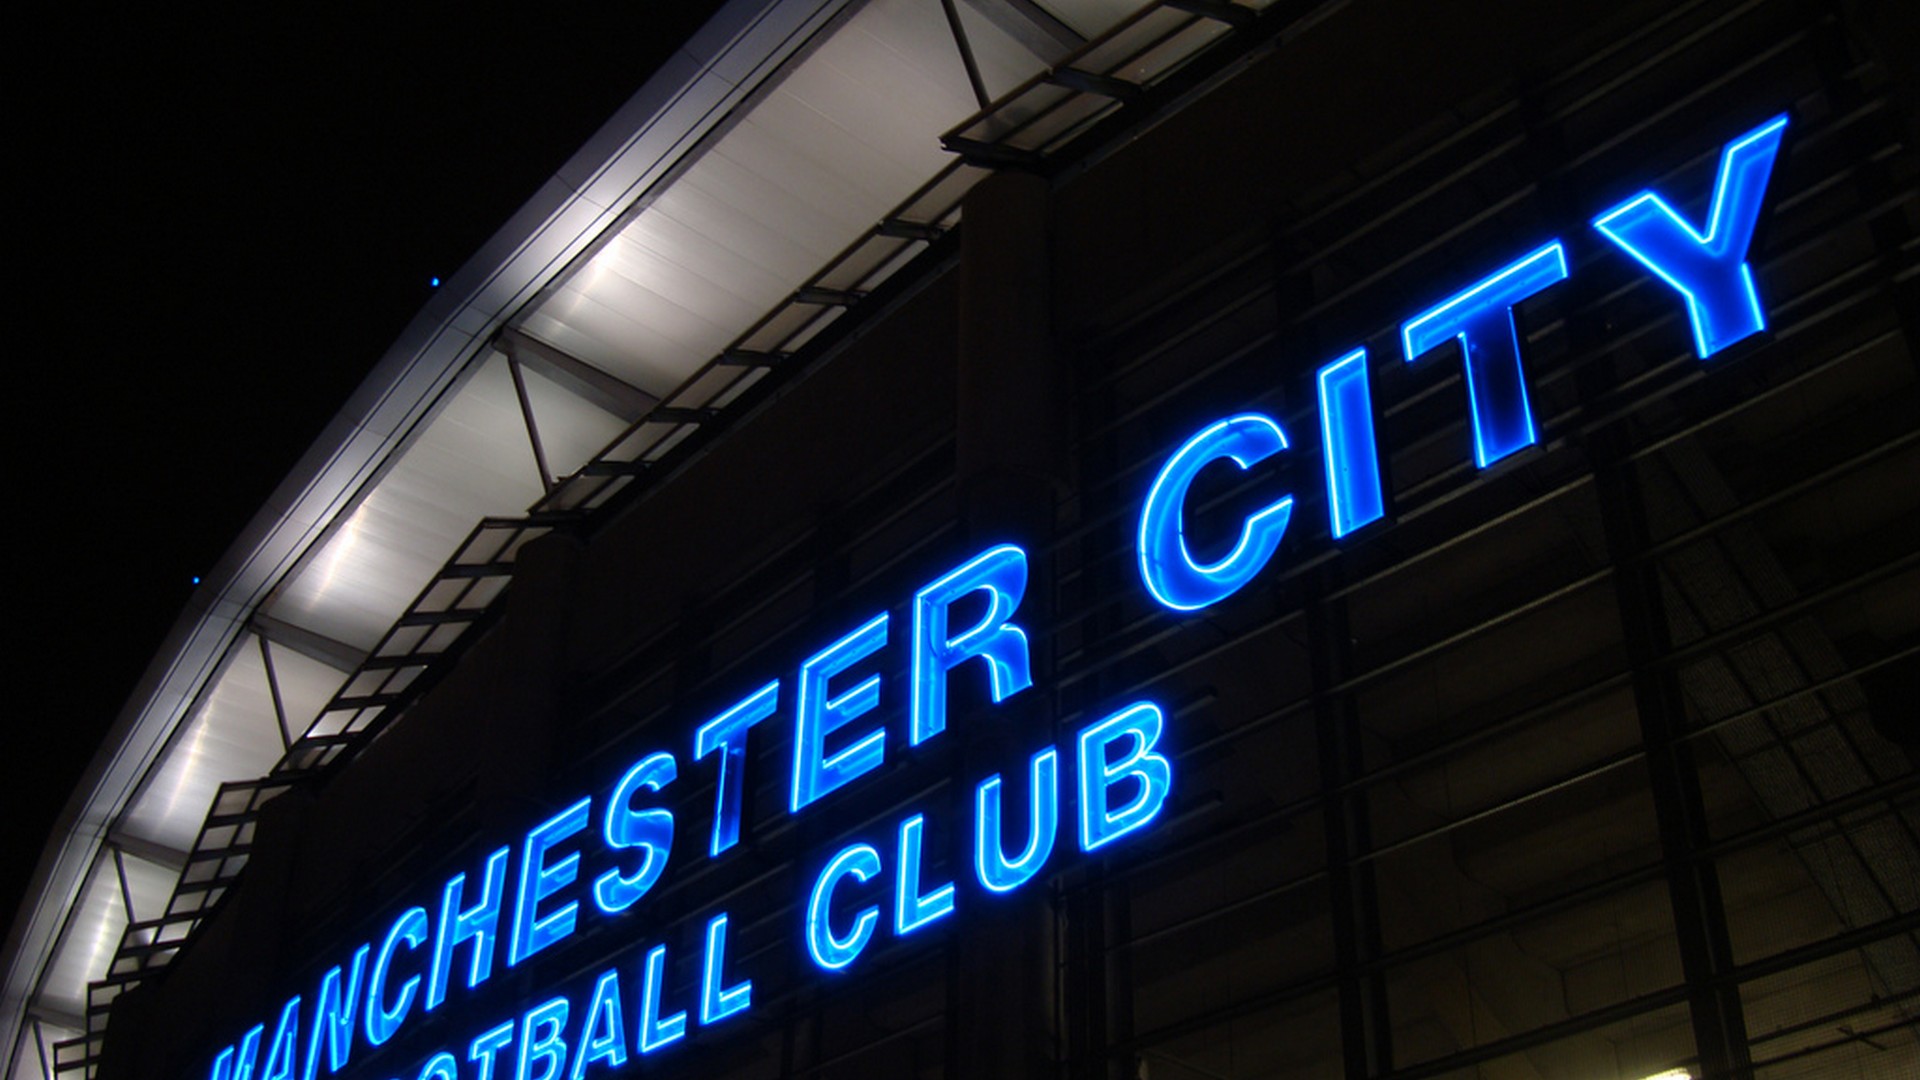 Manchester City HD Wallpapers With high-resolution 1920X1080 pixel. You can use this wallpaper for your Desktop Computers, Mac Screensavers, Windows Backgrounds, iPhone Wallpapers, Tablet or Android Lock screen and another Mobile device